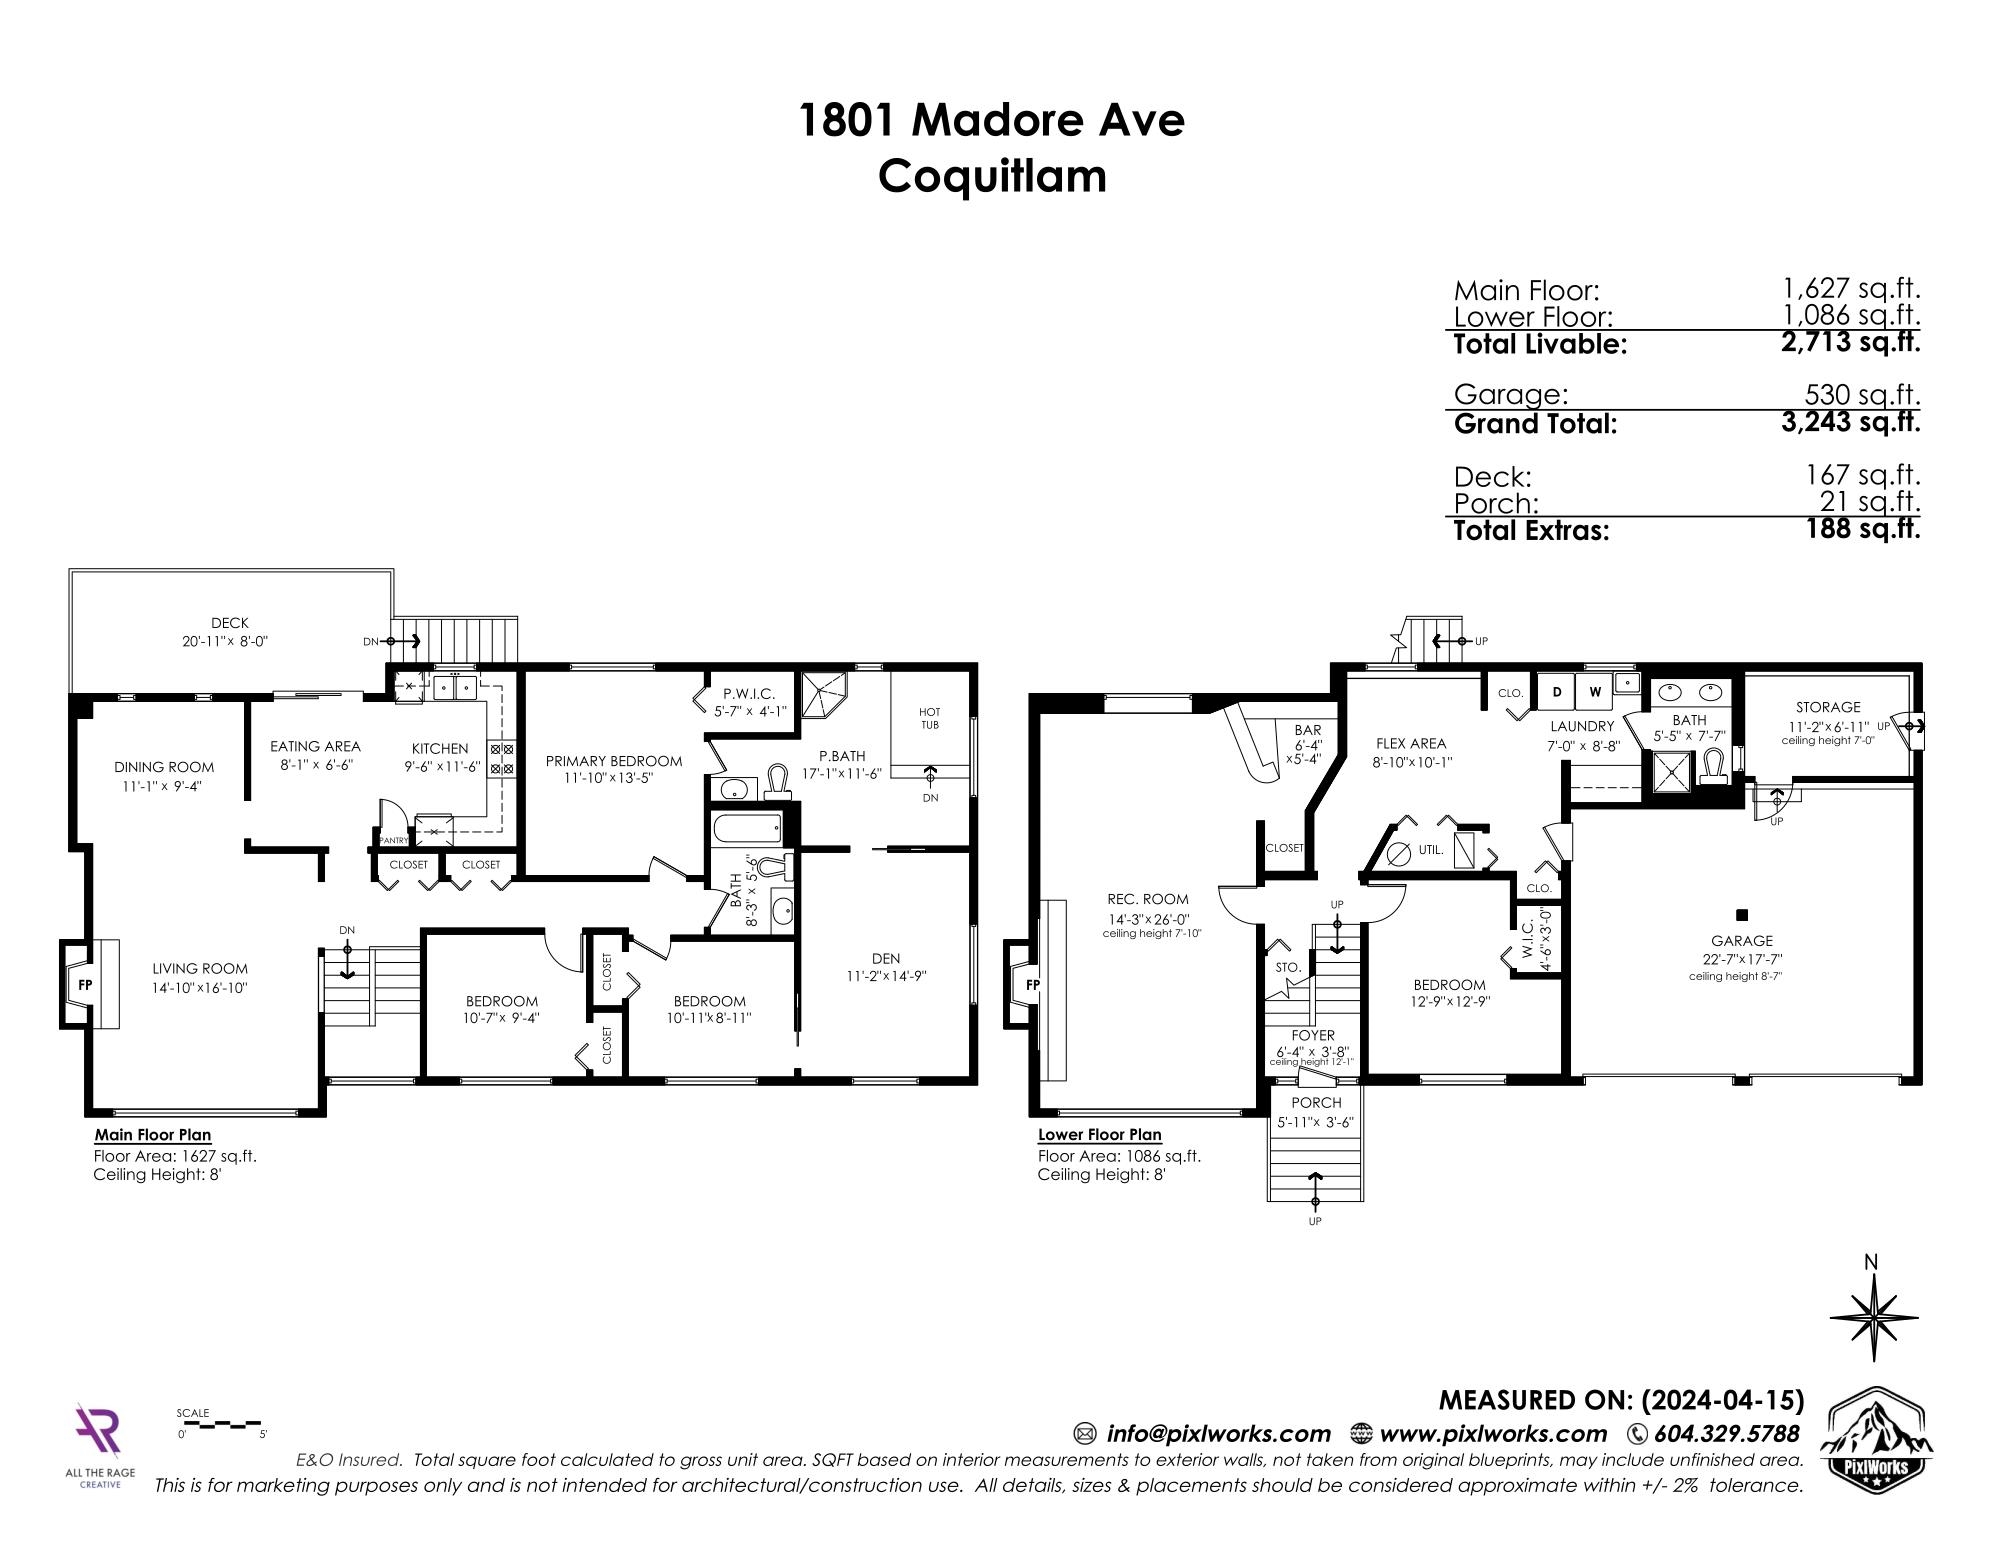 Listing image of 1801 MADORE AVENUE